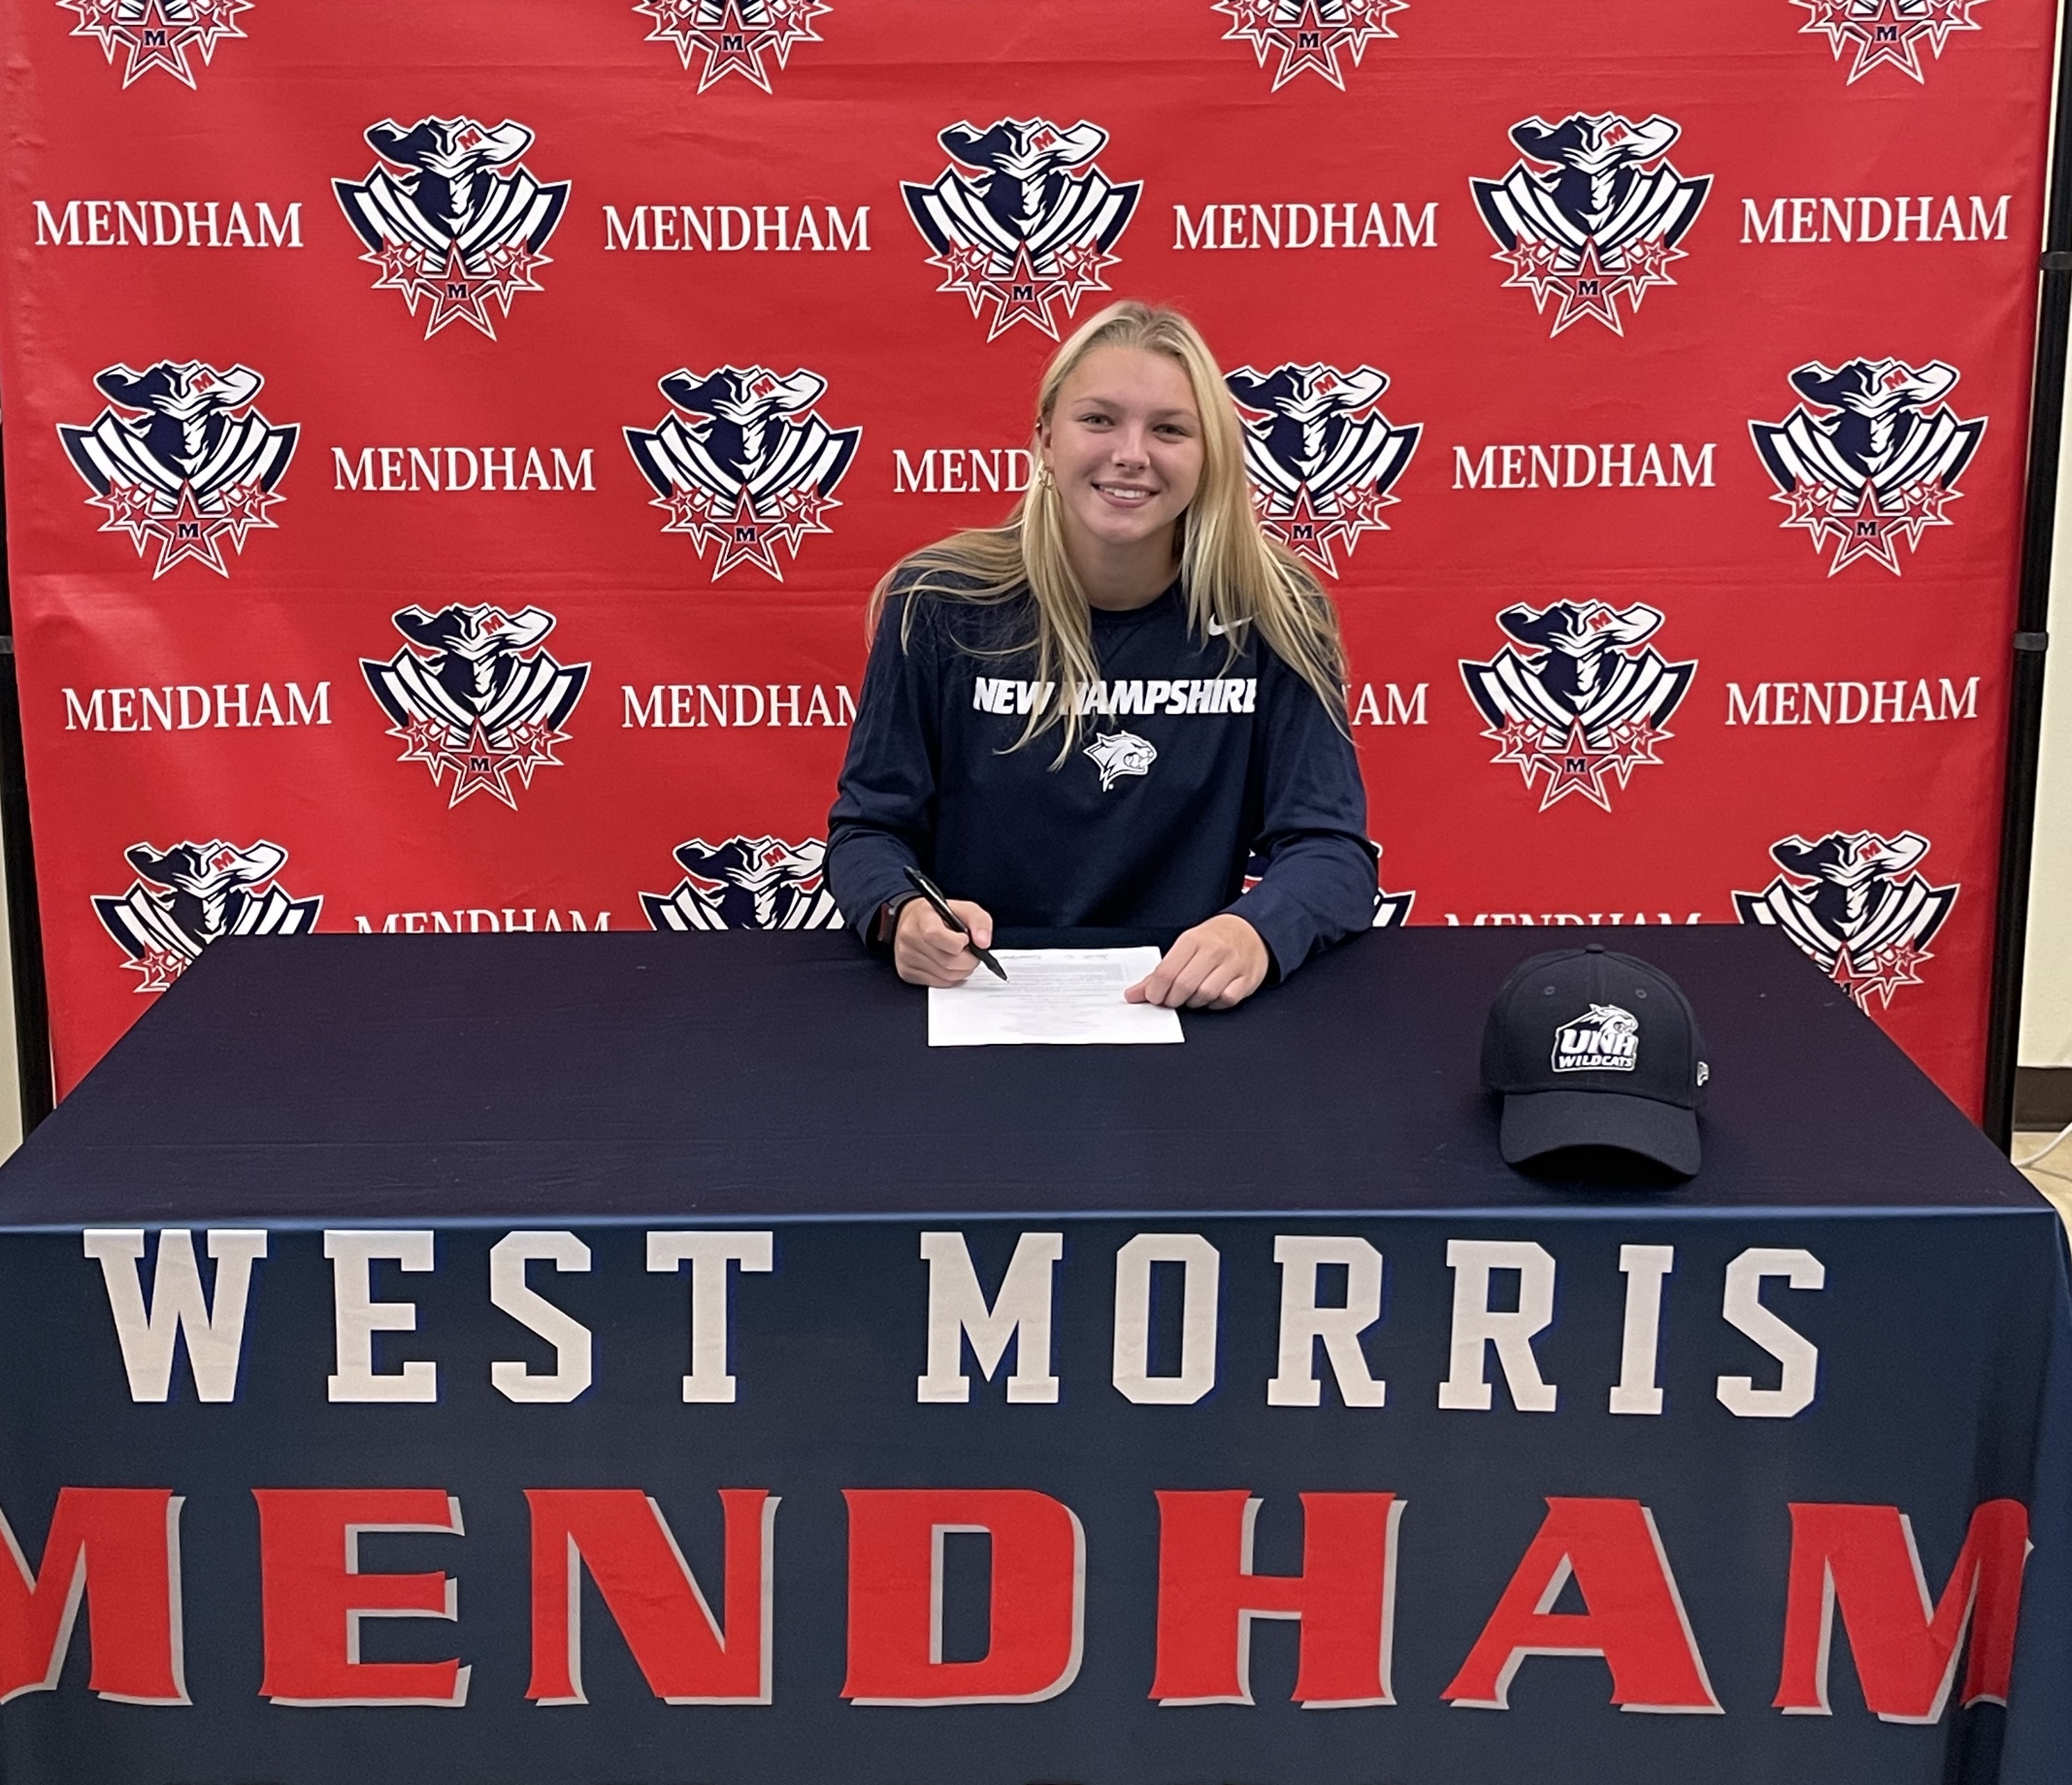 Sonja Zeepvat of Mendham signs her National Letter of Intent to play soccer at the University of New Hampshire.